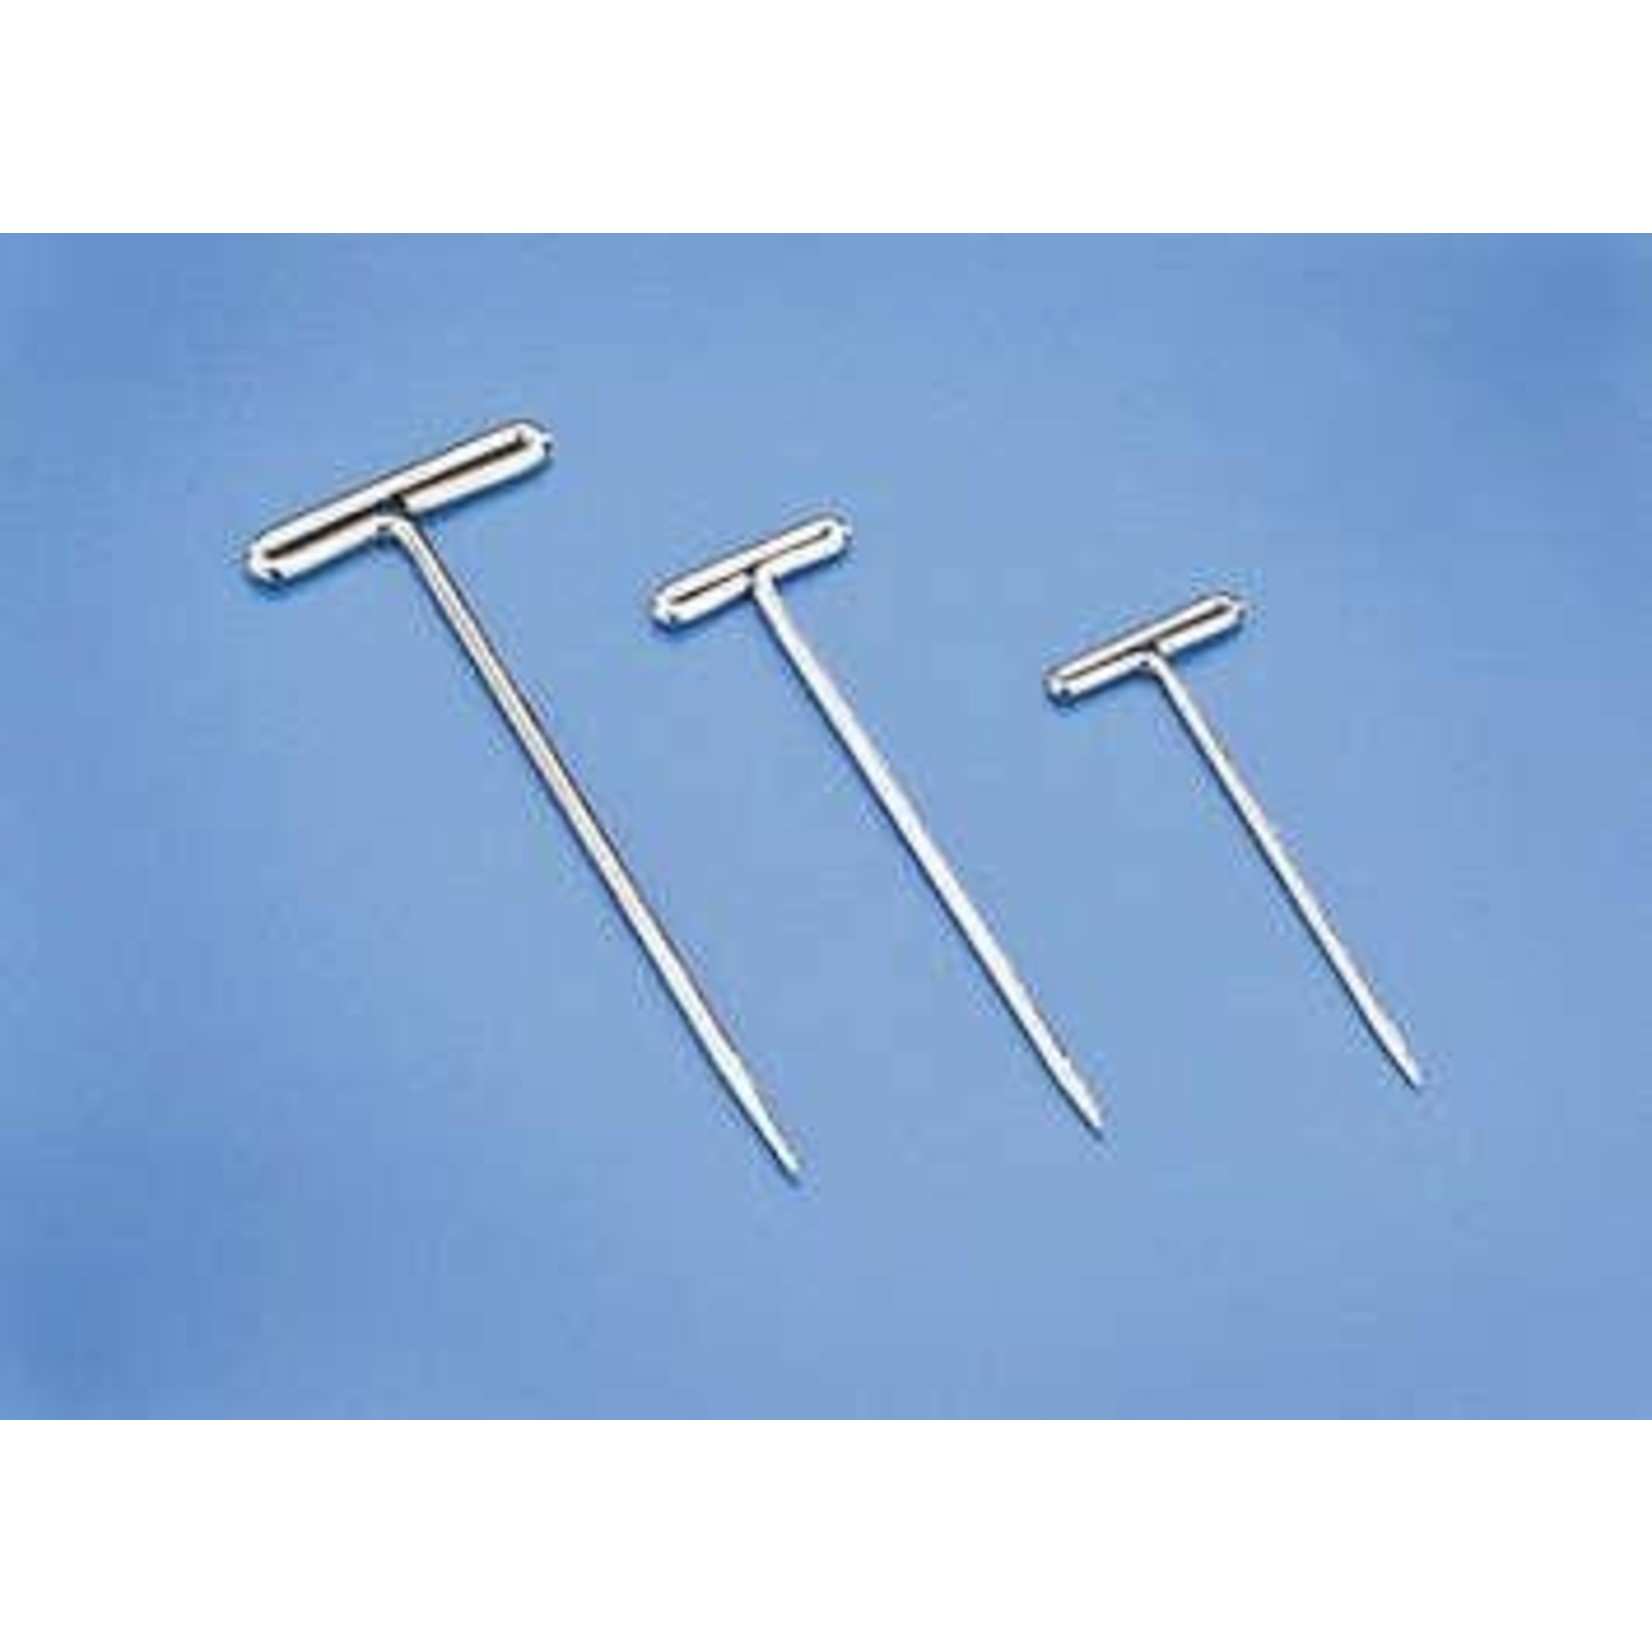 Dubro 1" Nickel Plated T-Pins 100pc